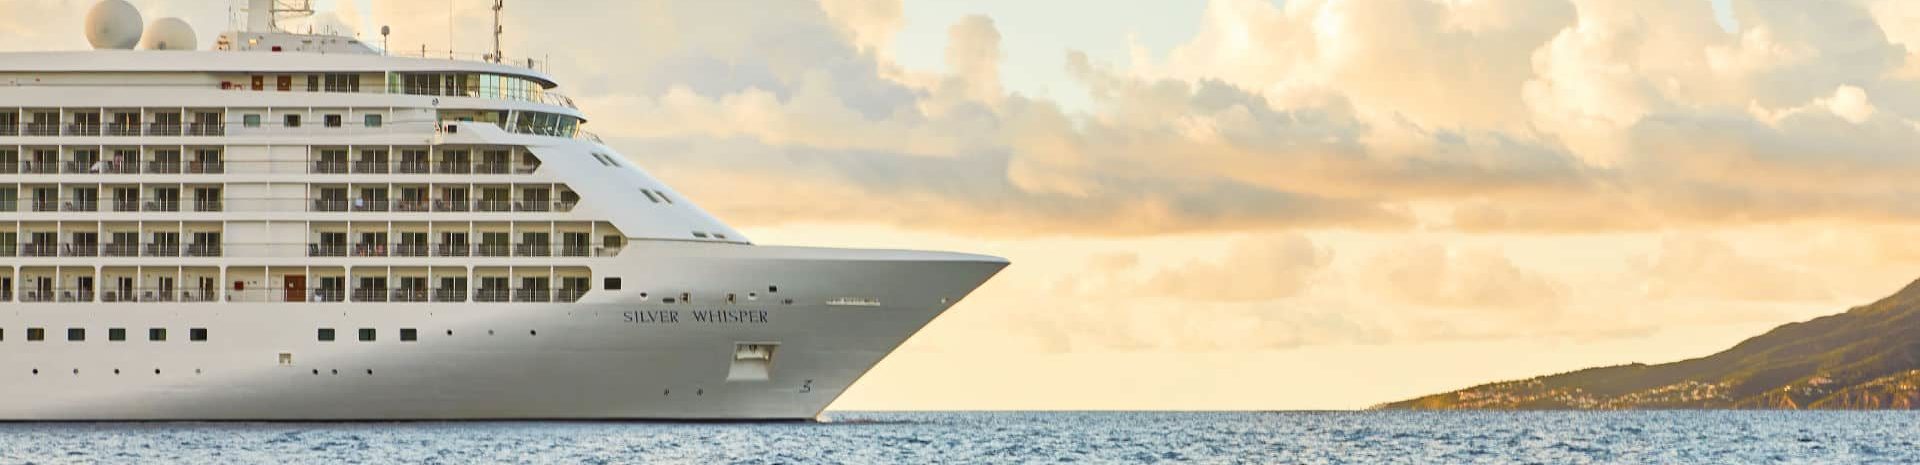 Silver Whisper Review - The Luxury Cruise Review